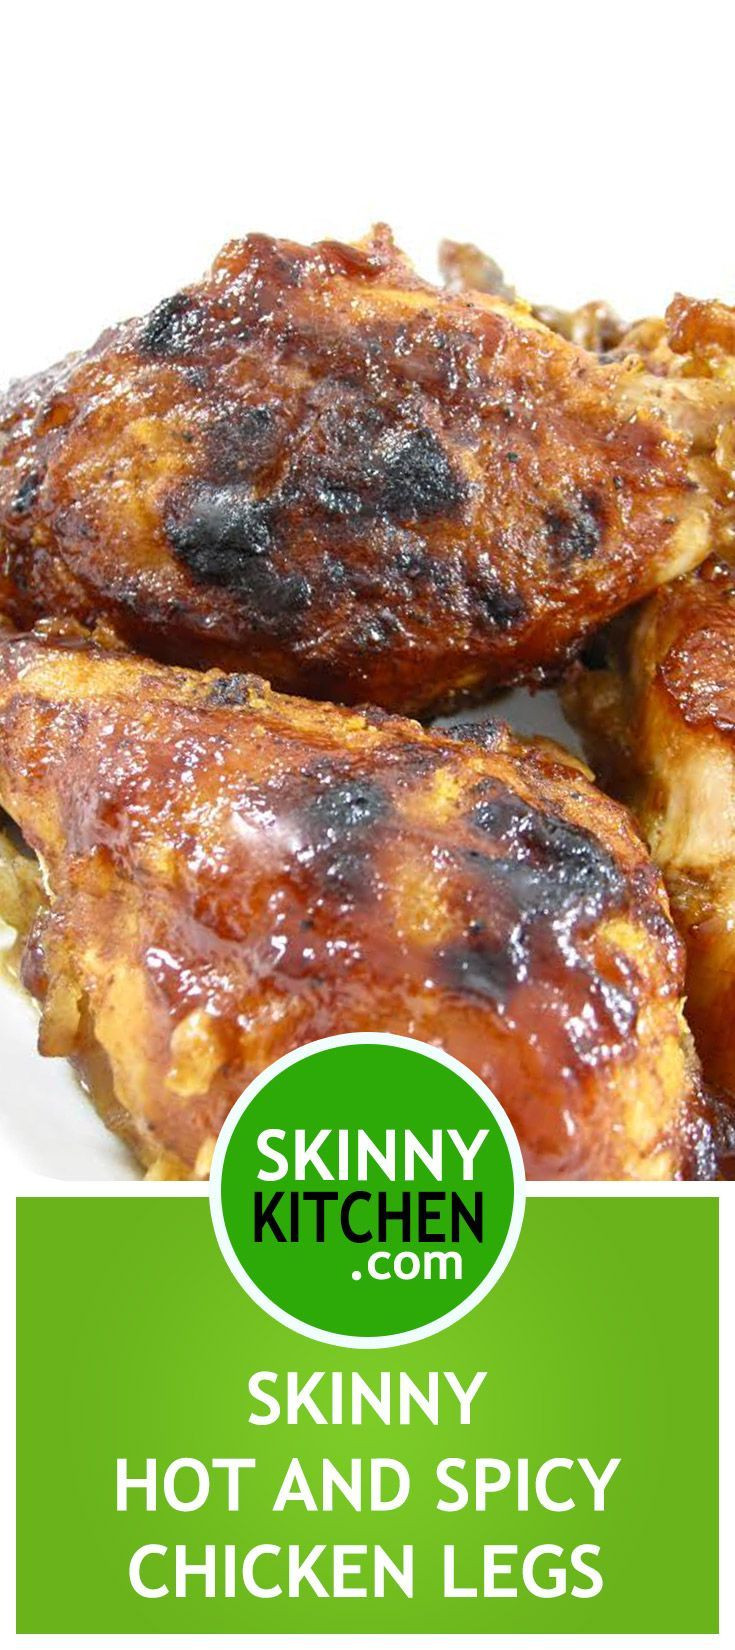 Calories In Fried Chicken Leg
 Skinny Hot and Spicy Chicken Legs